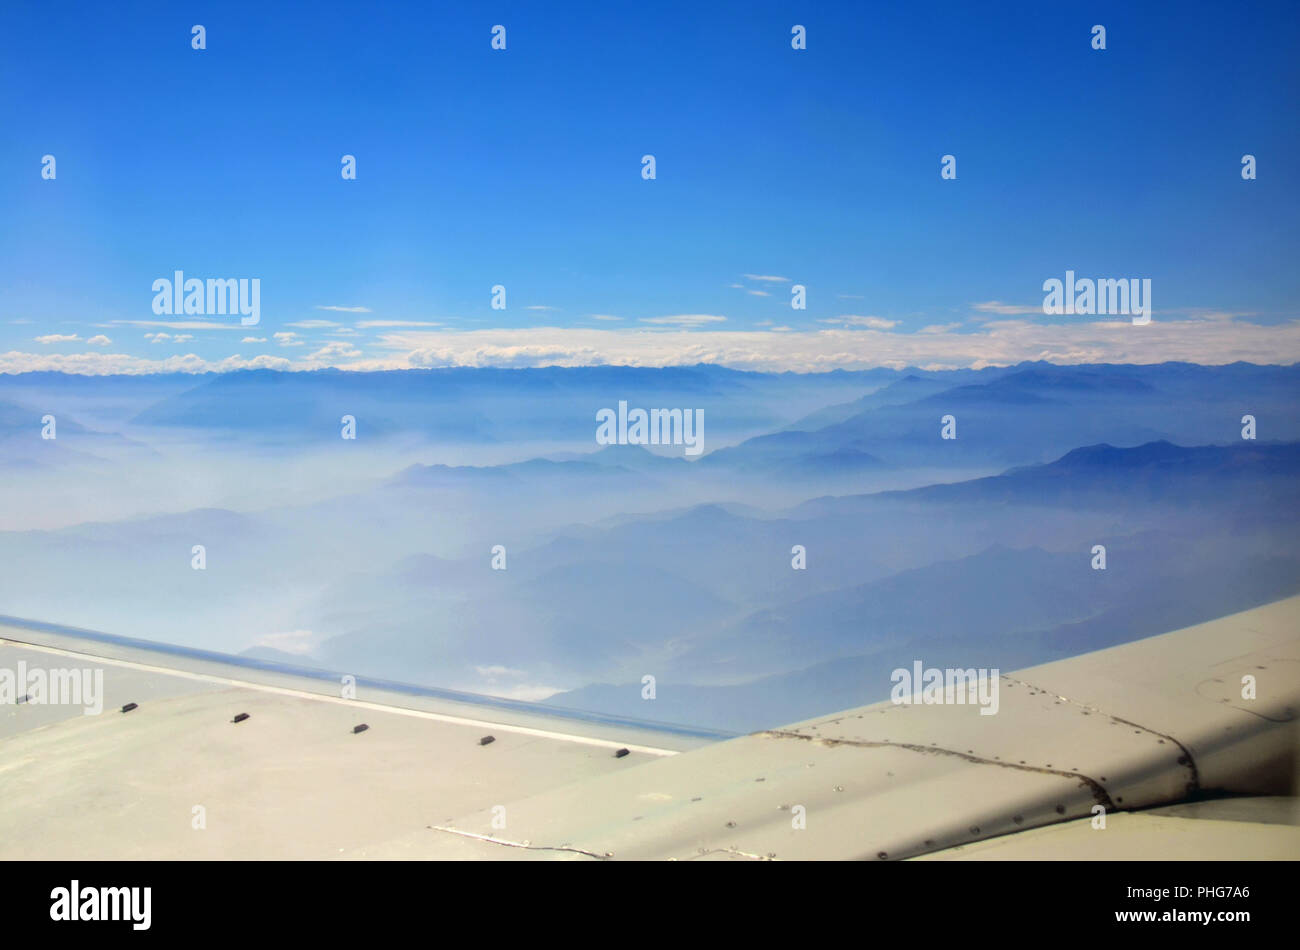 Mountains under plane wing Stock Photo